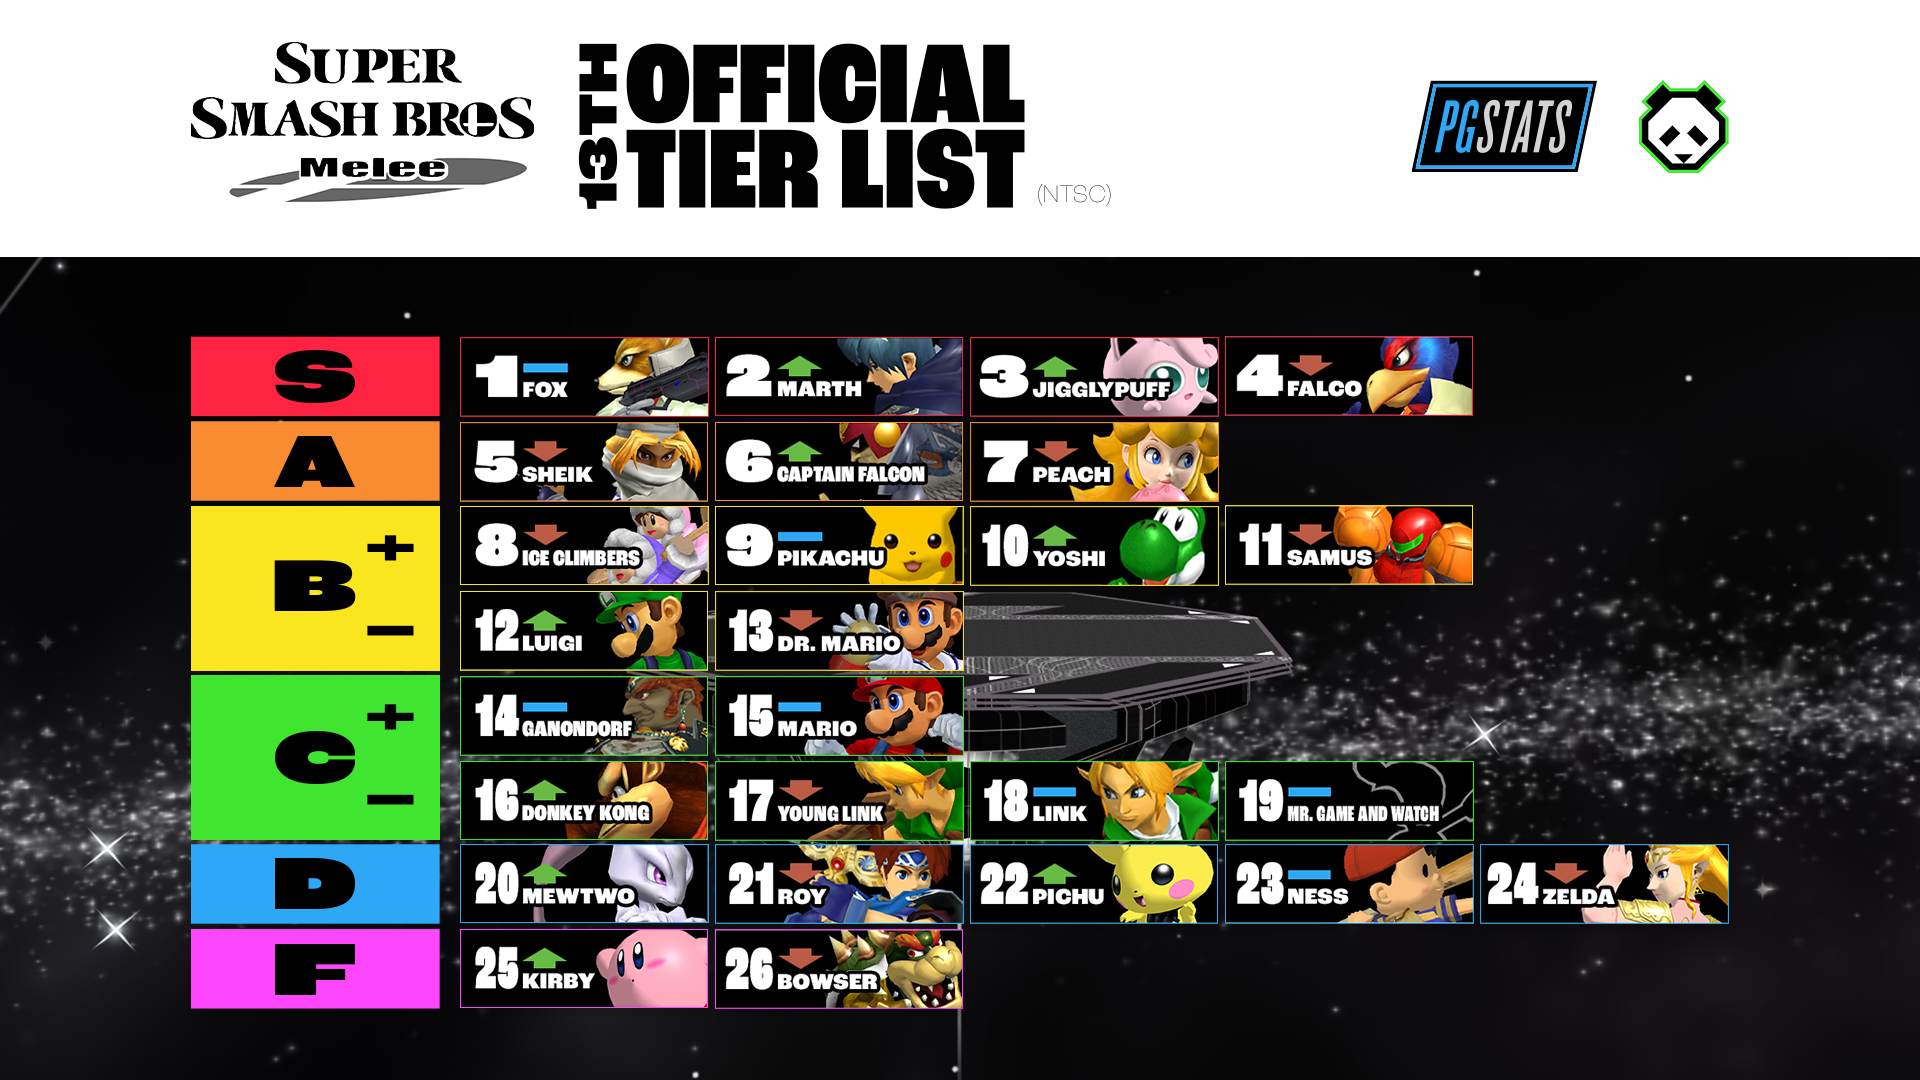 Super Smash Bros. Melee's Top Players Release Updated Fighter Tier List